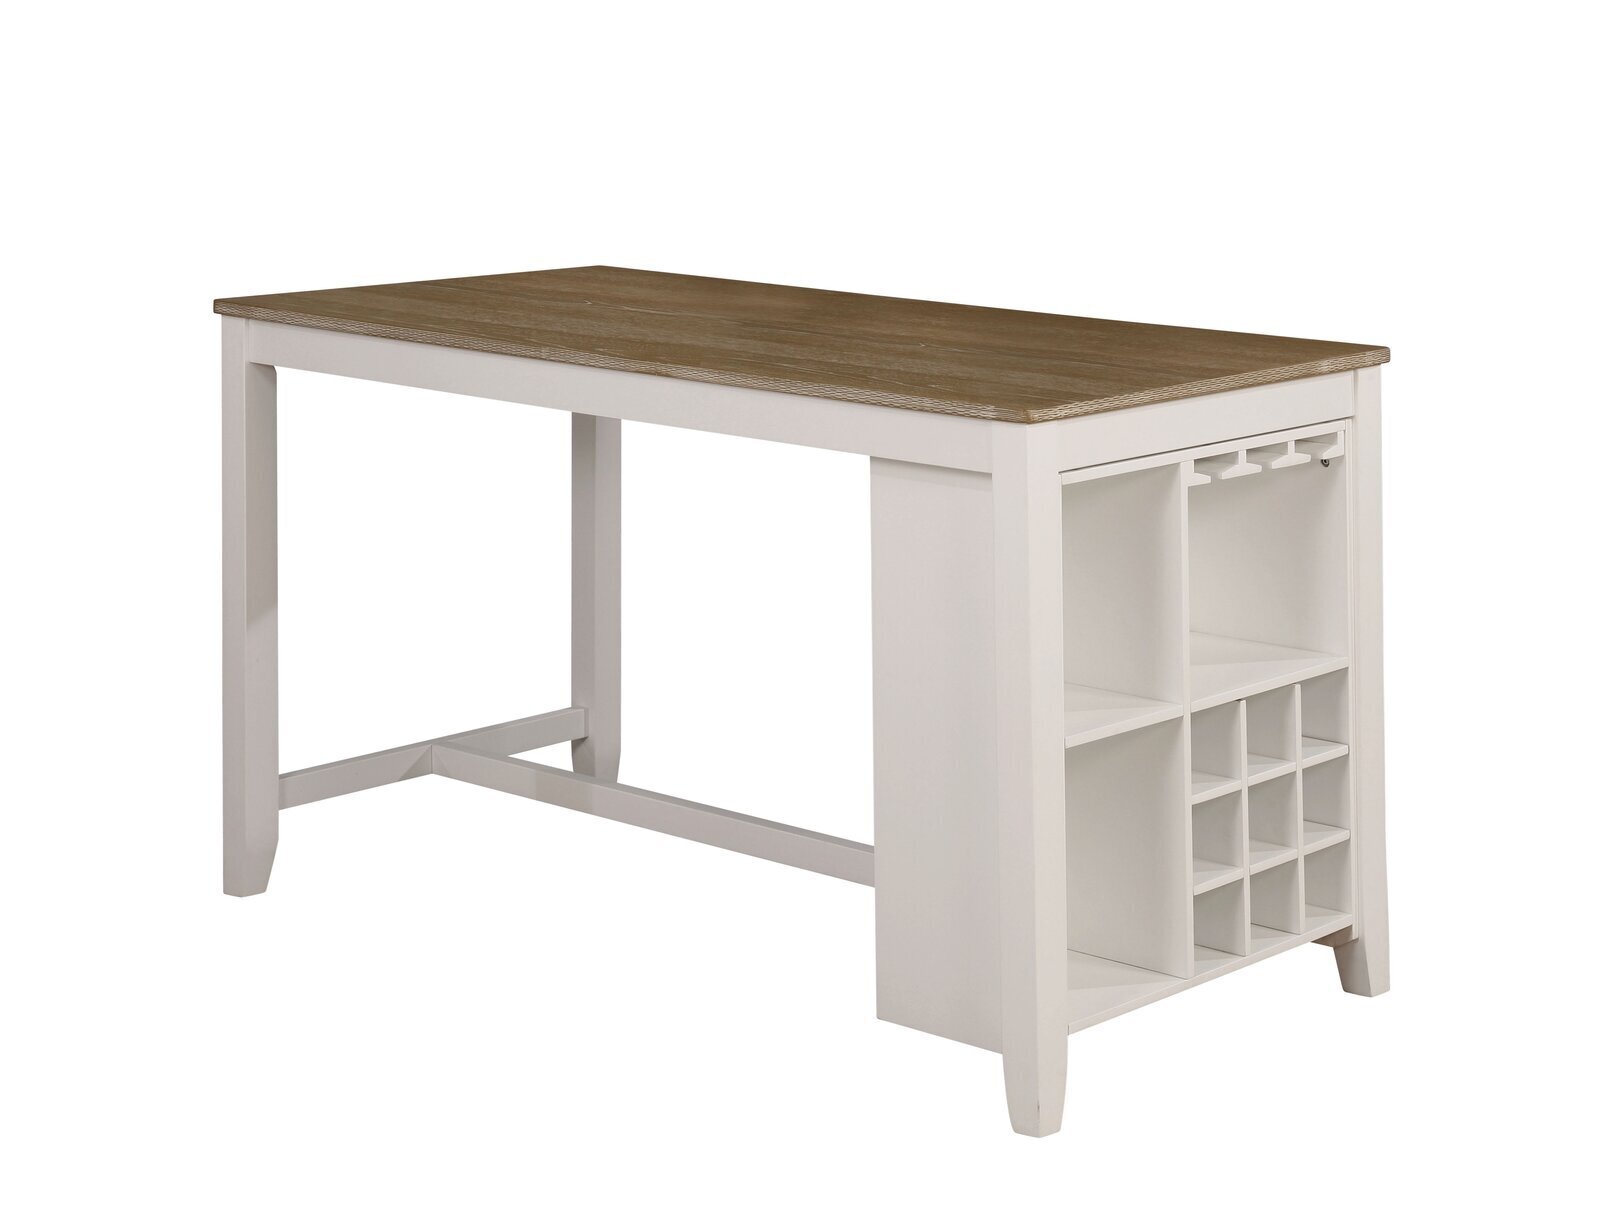 Transitional meets country chic wine storage table